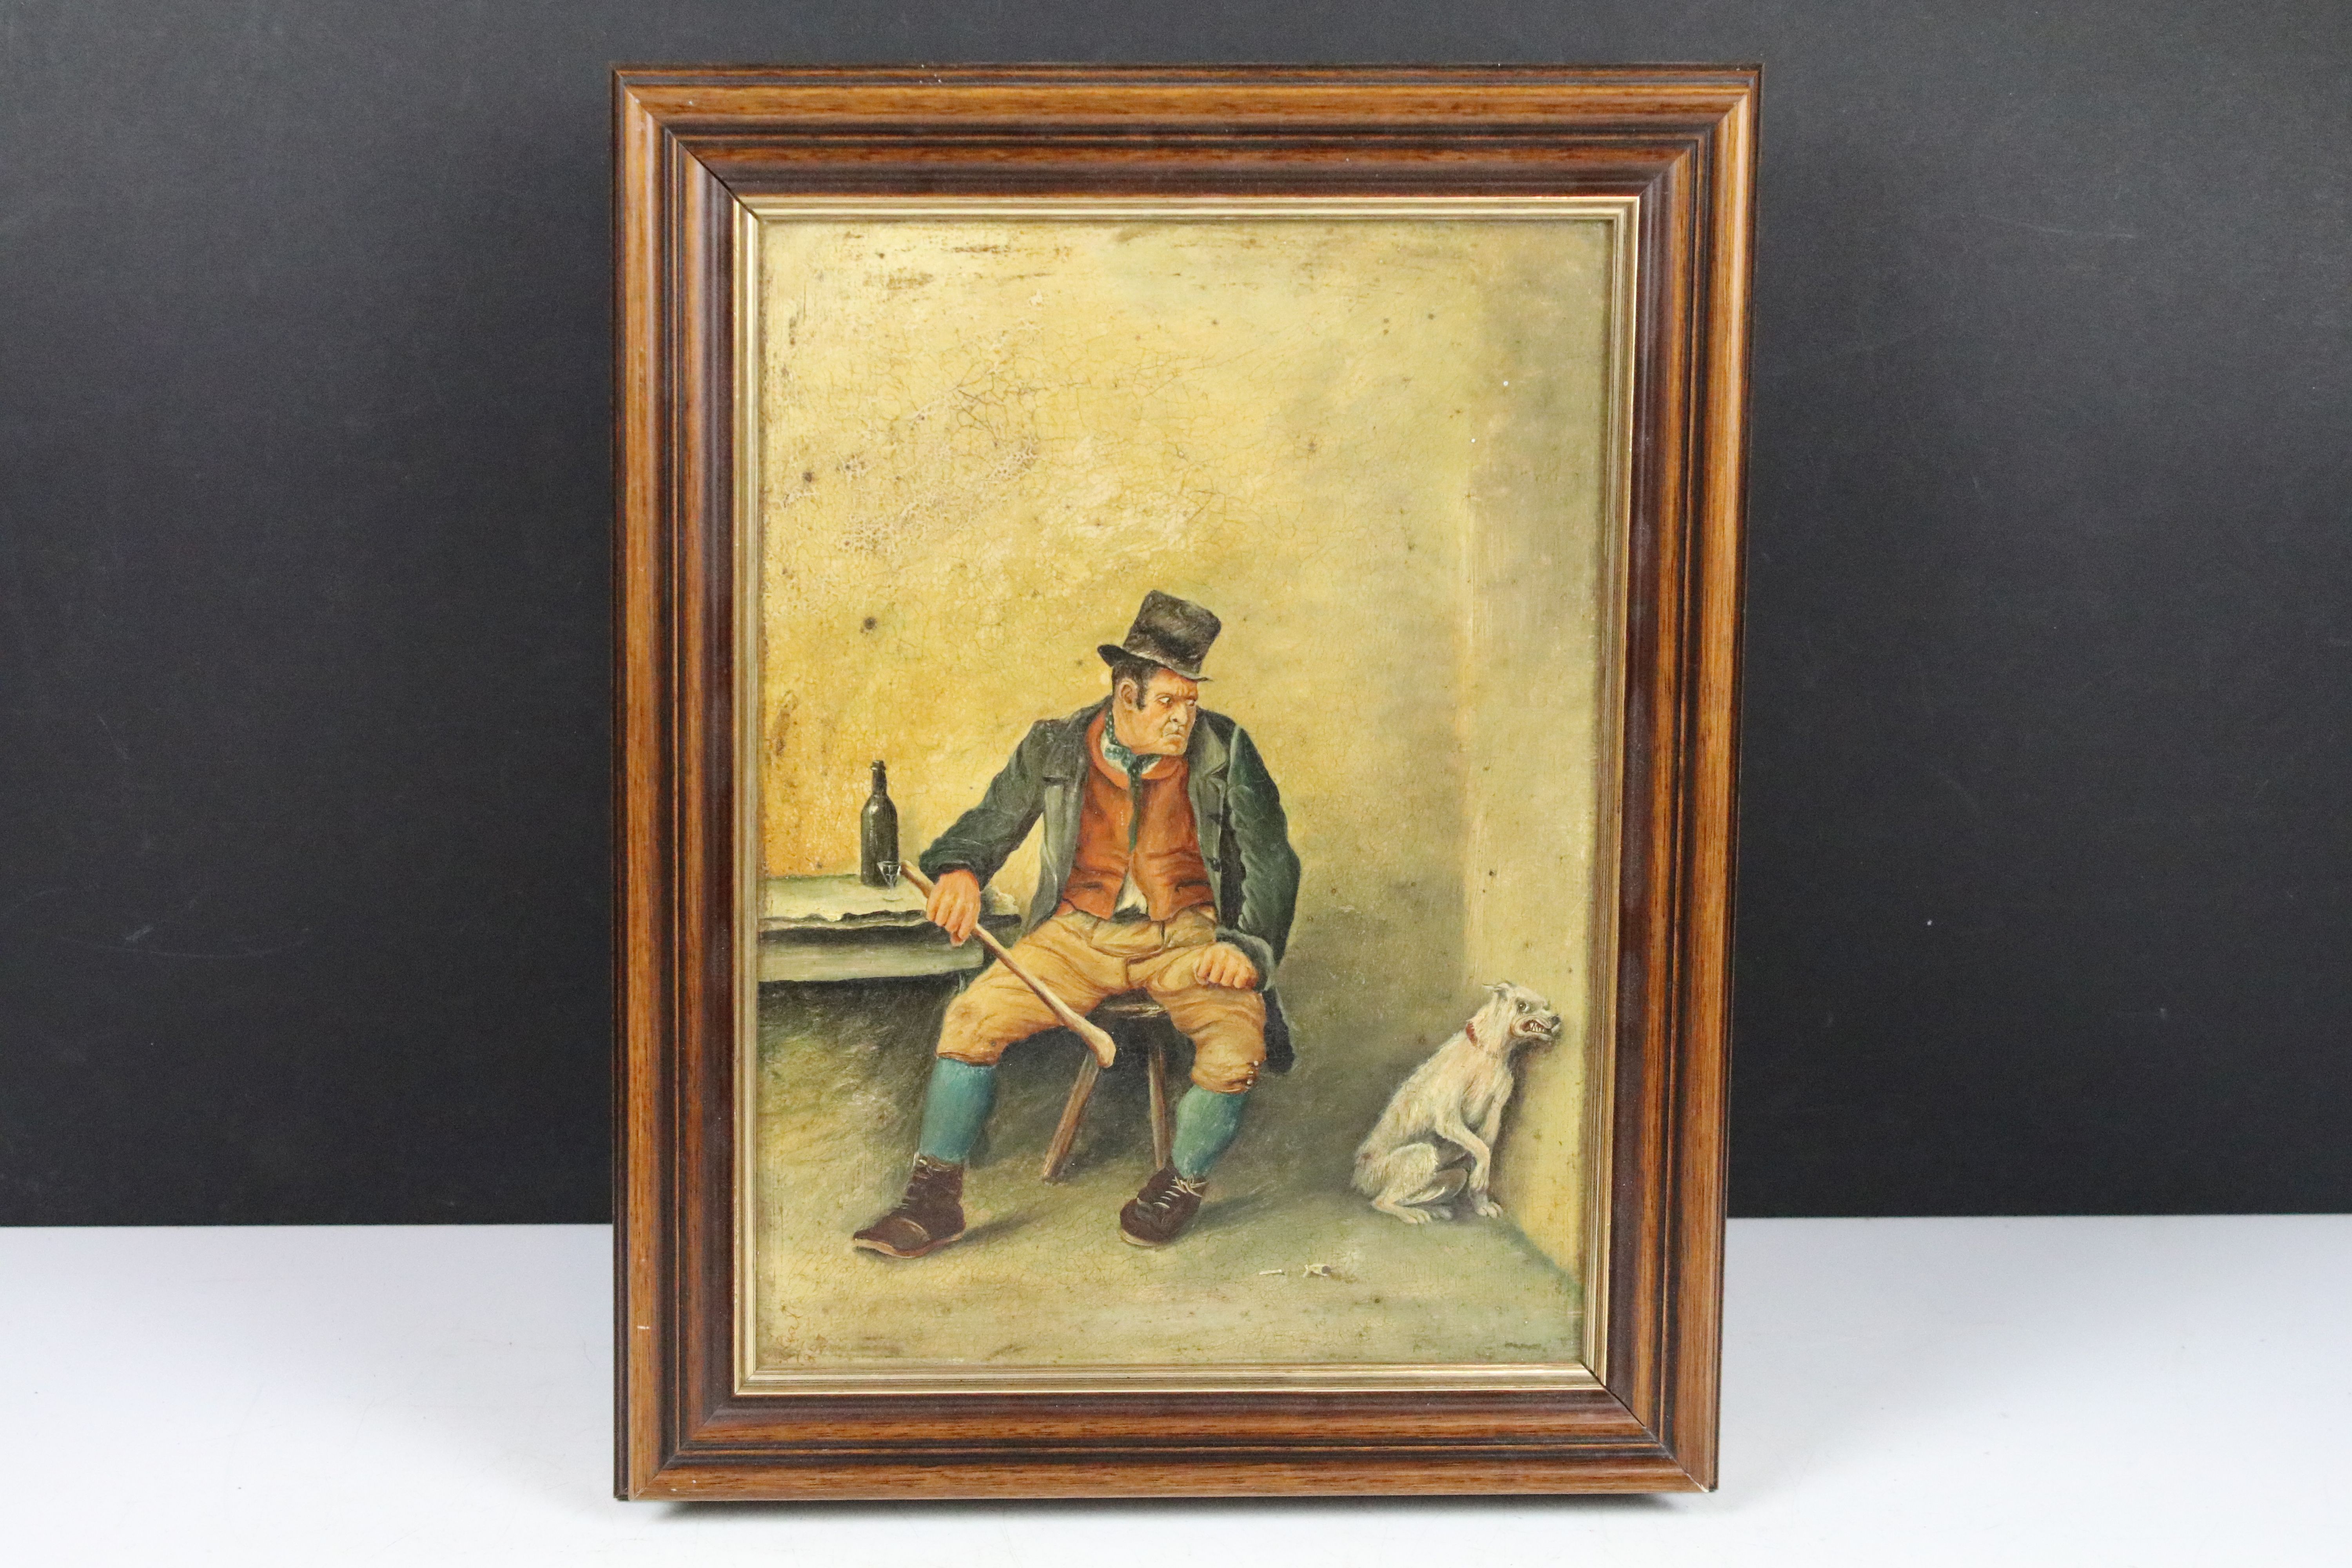 19th century English School, portrait of a man with a cowering dog, oil on board, signed